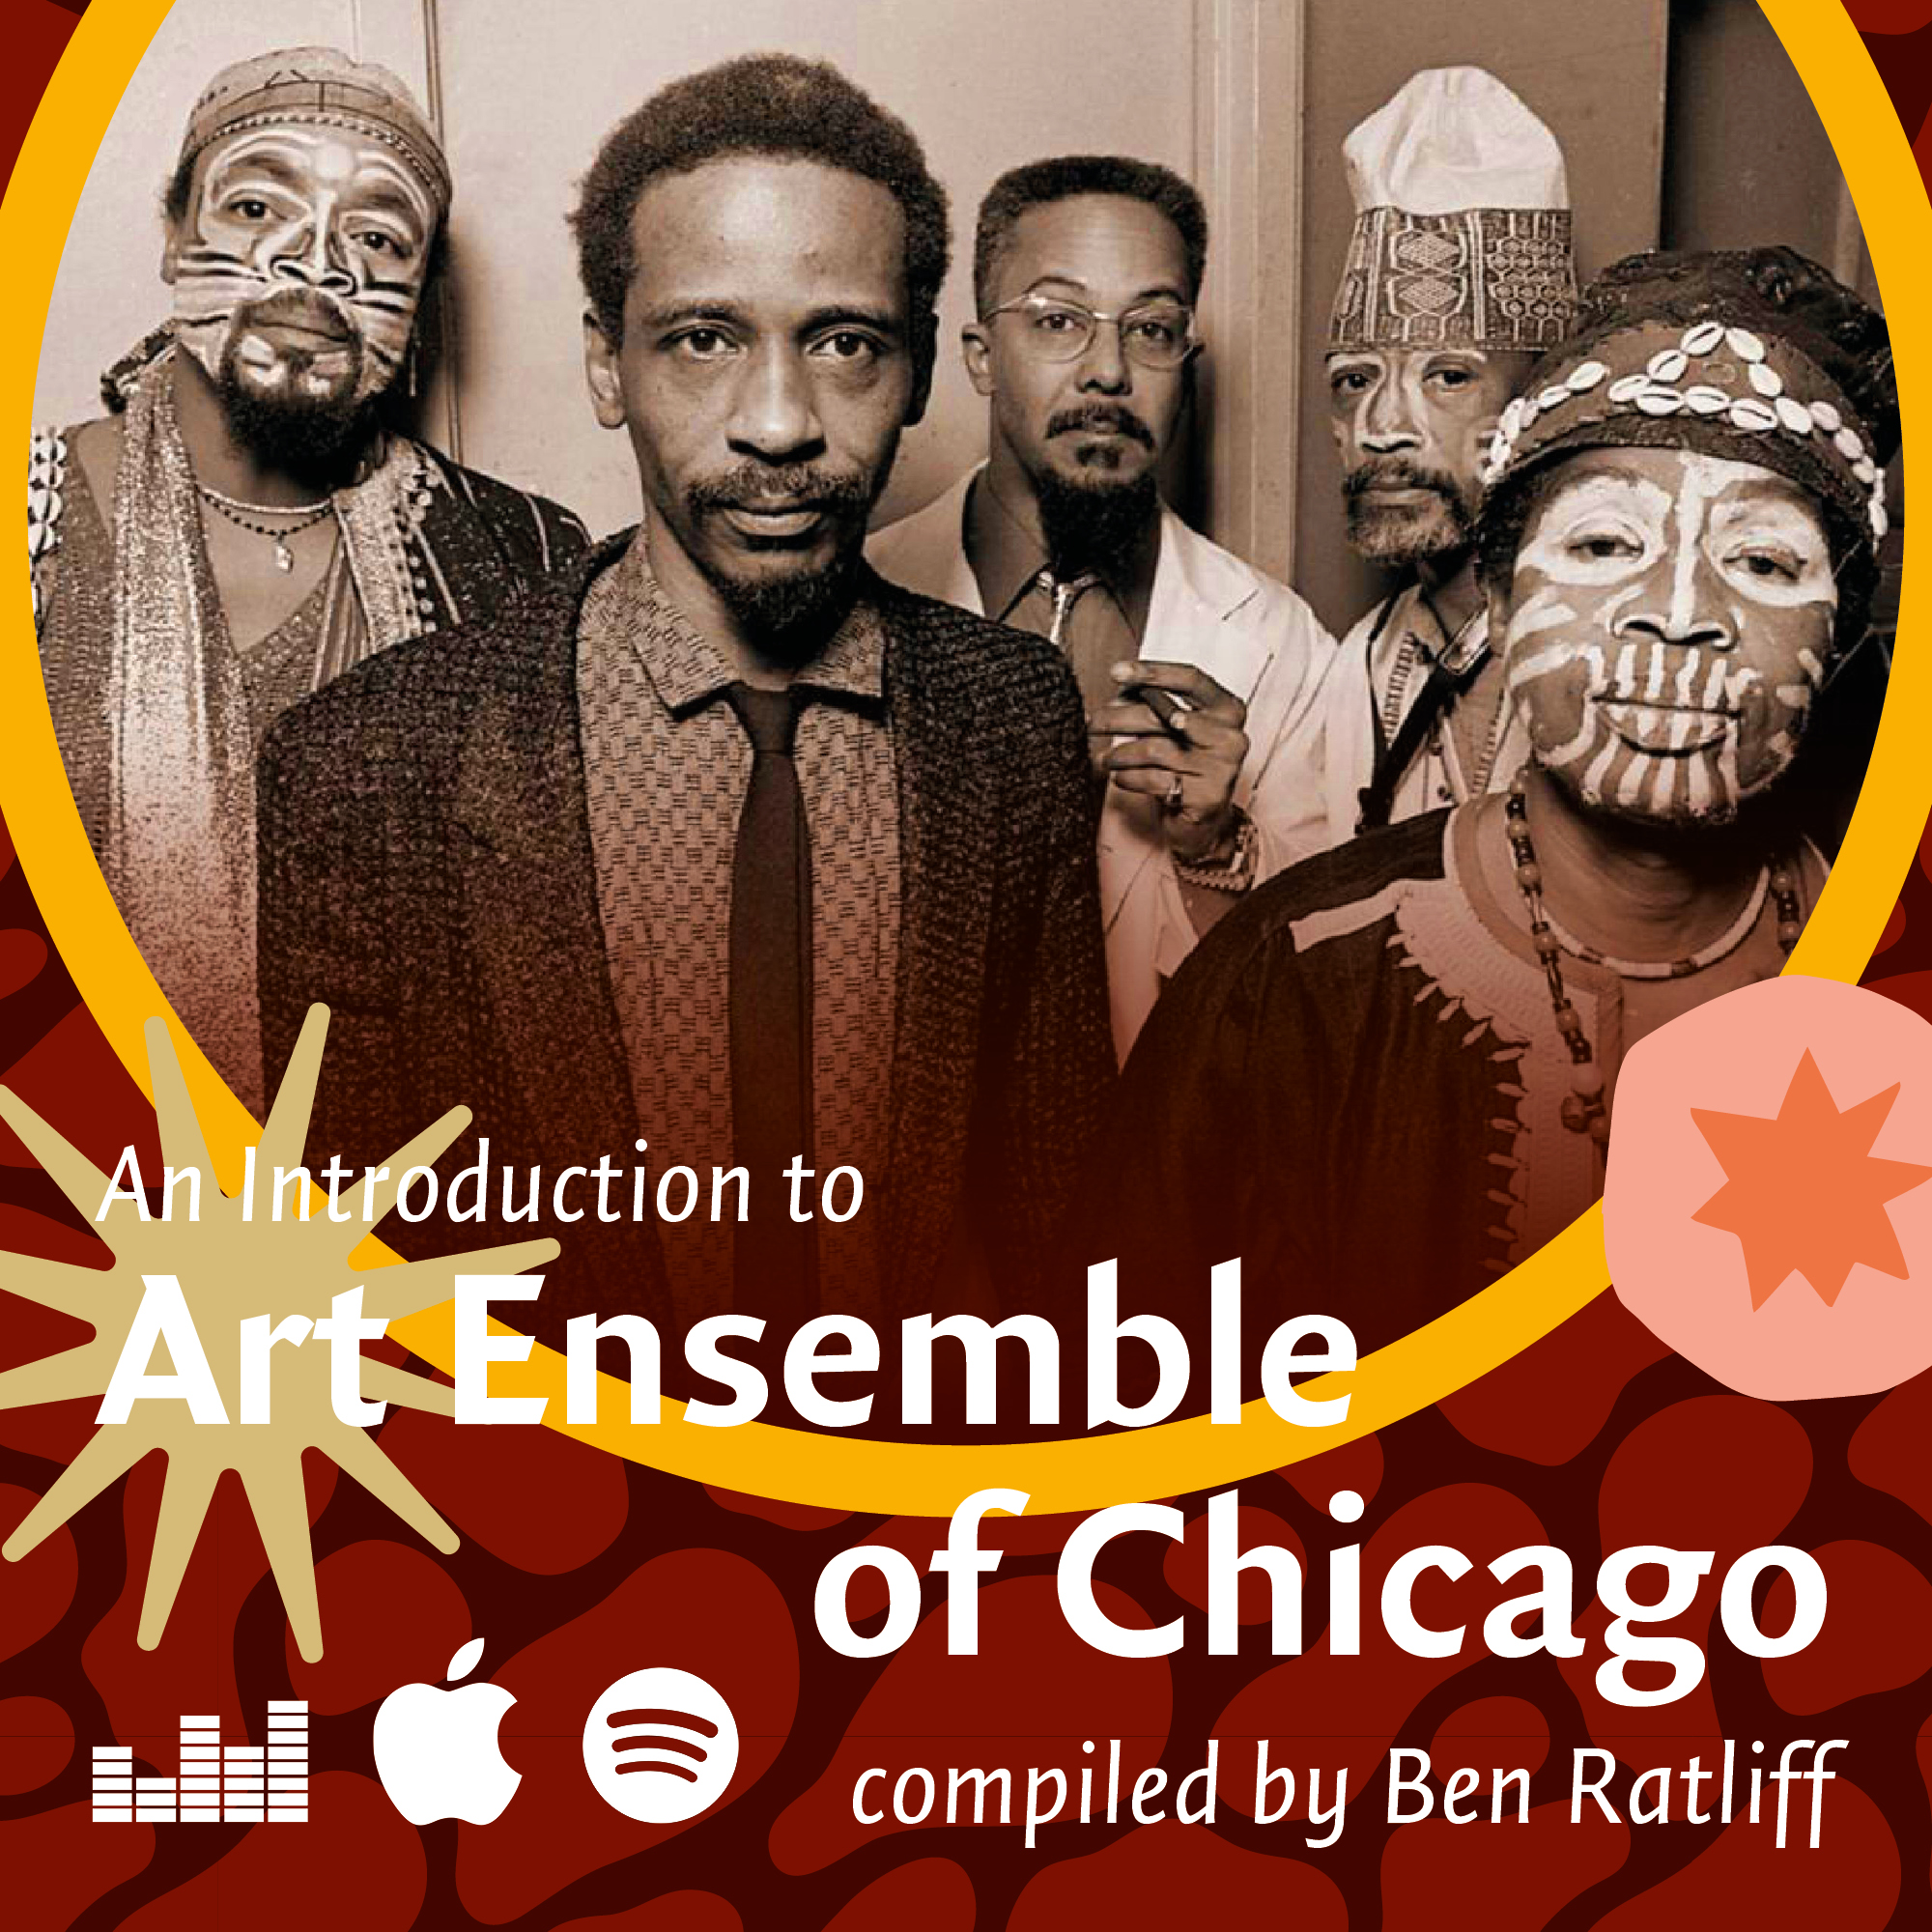 Playlist: An Introduction to Art Ensemble of Chicago, compiled by Ben Ratliff